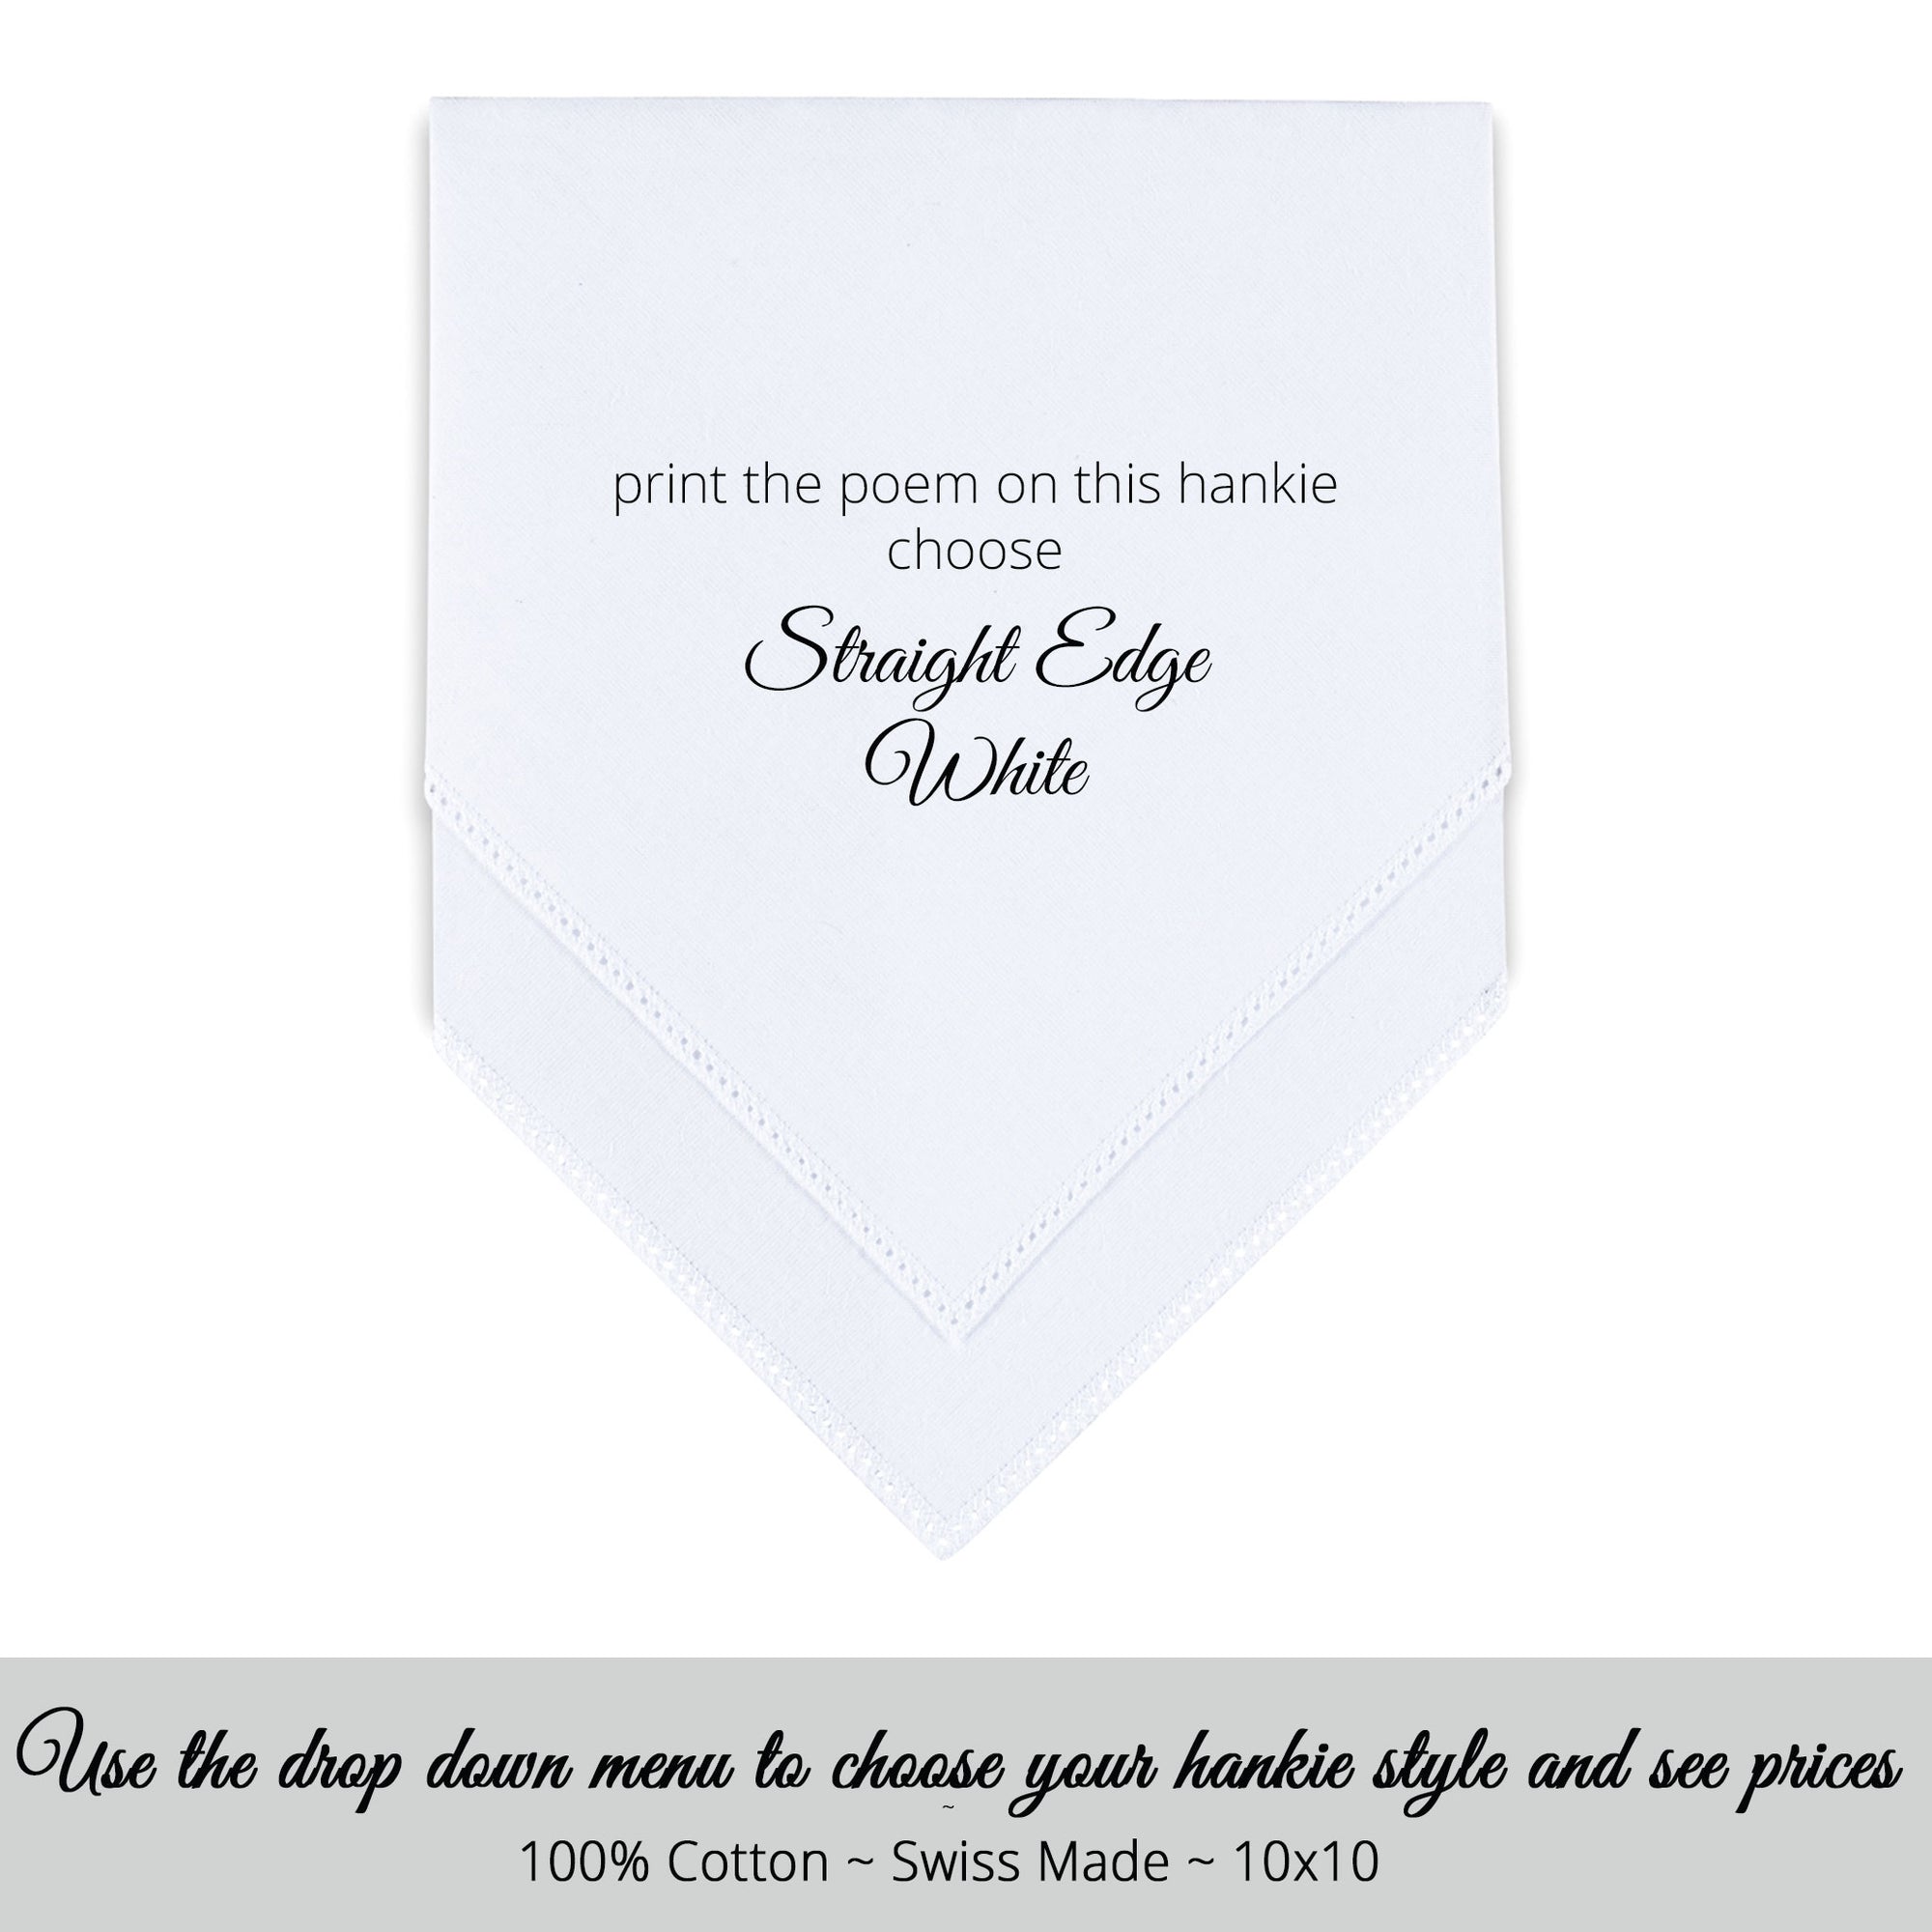 Straight edge white personalized wedding handkerchief for mother of the bride